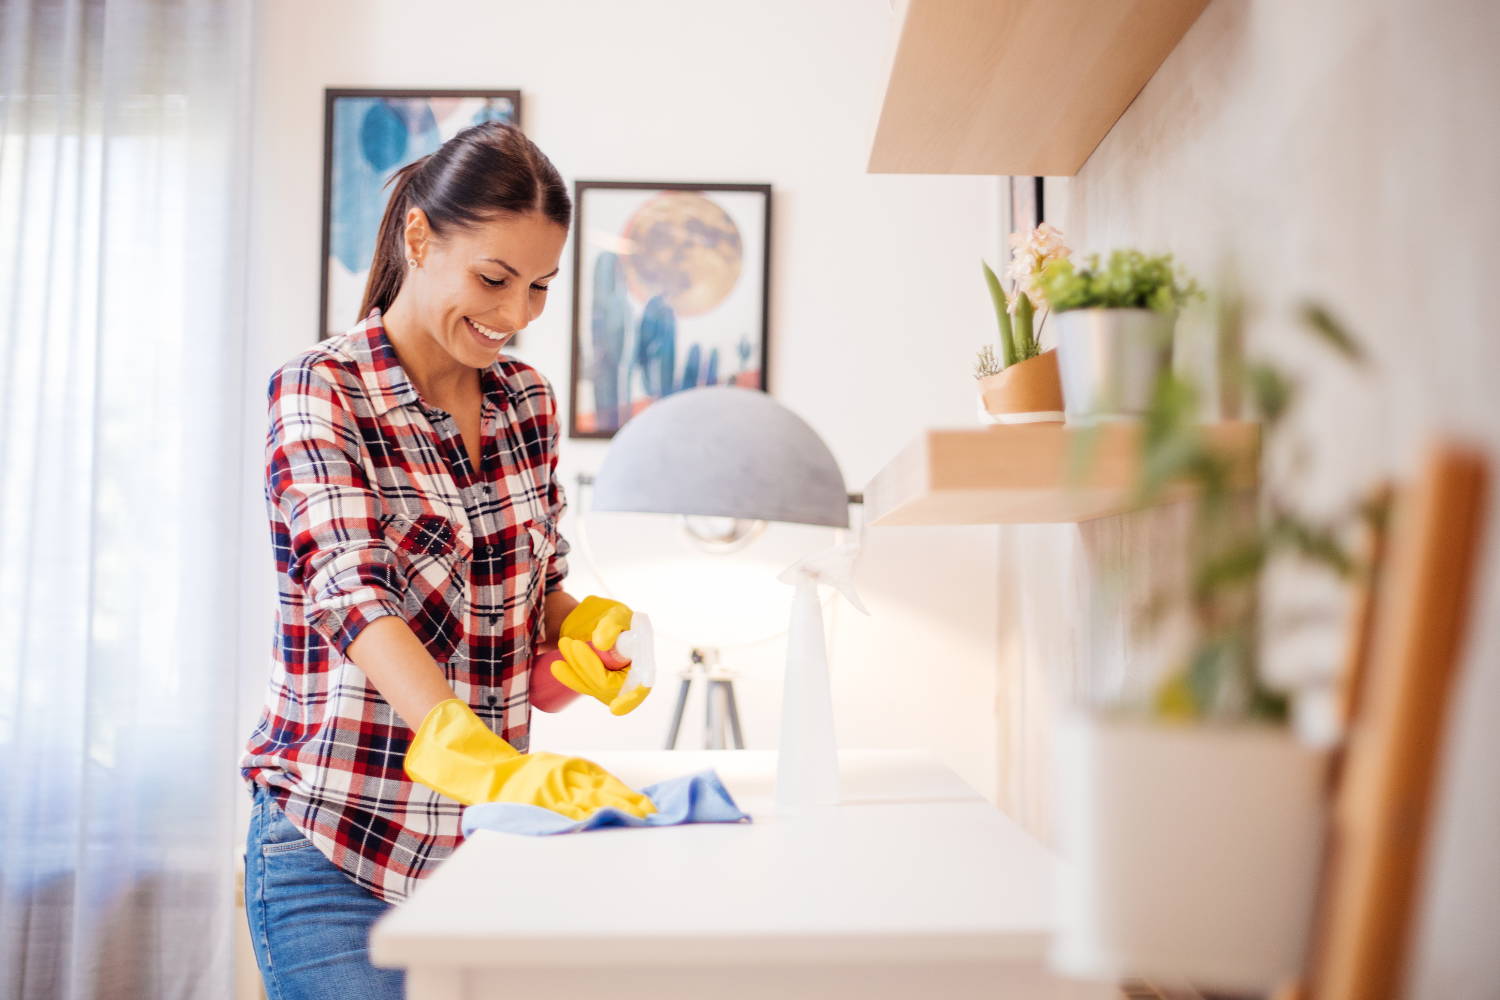 Spring-clean your cleaners: many surface products don't actually